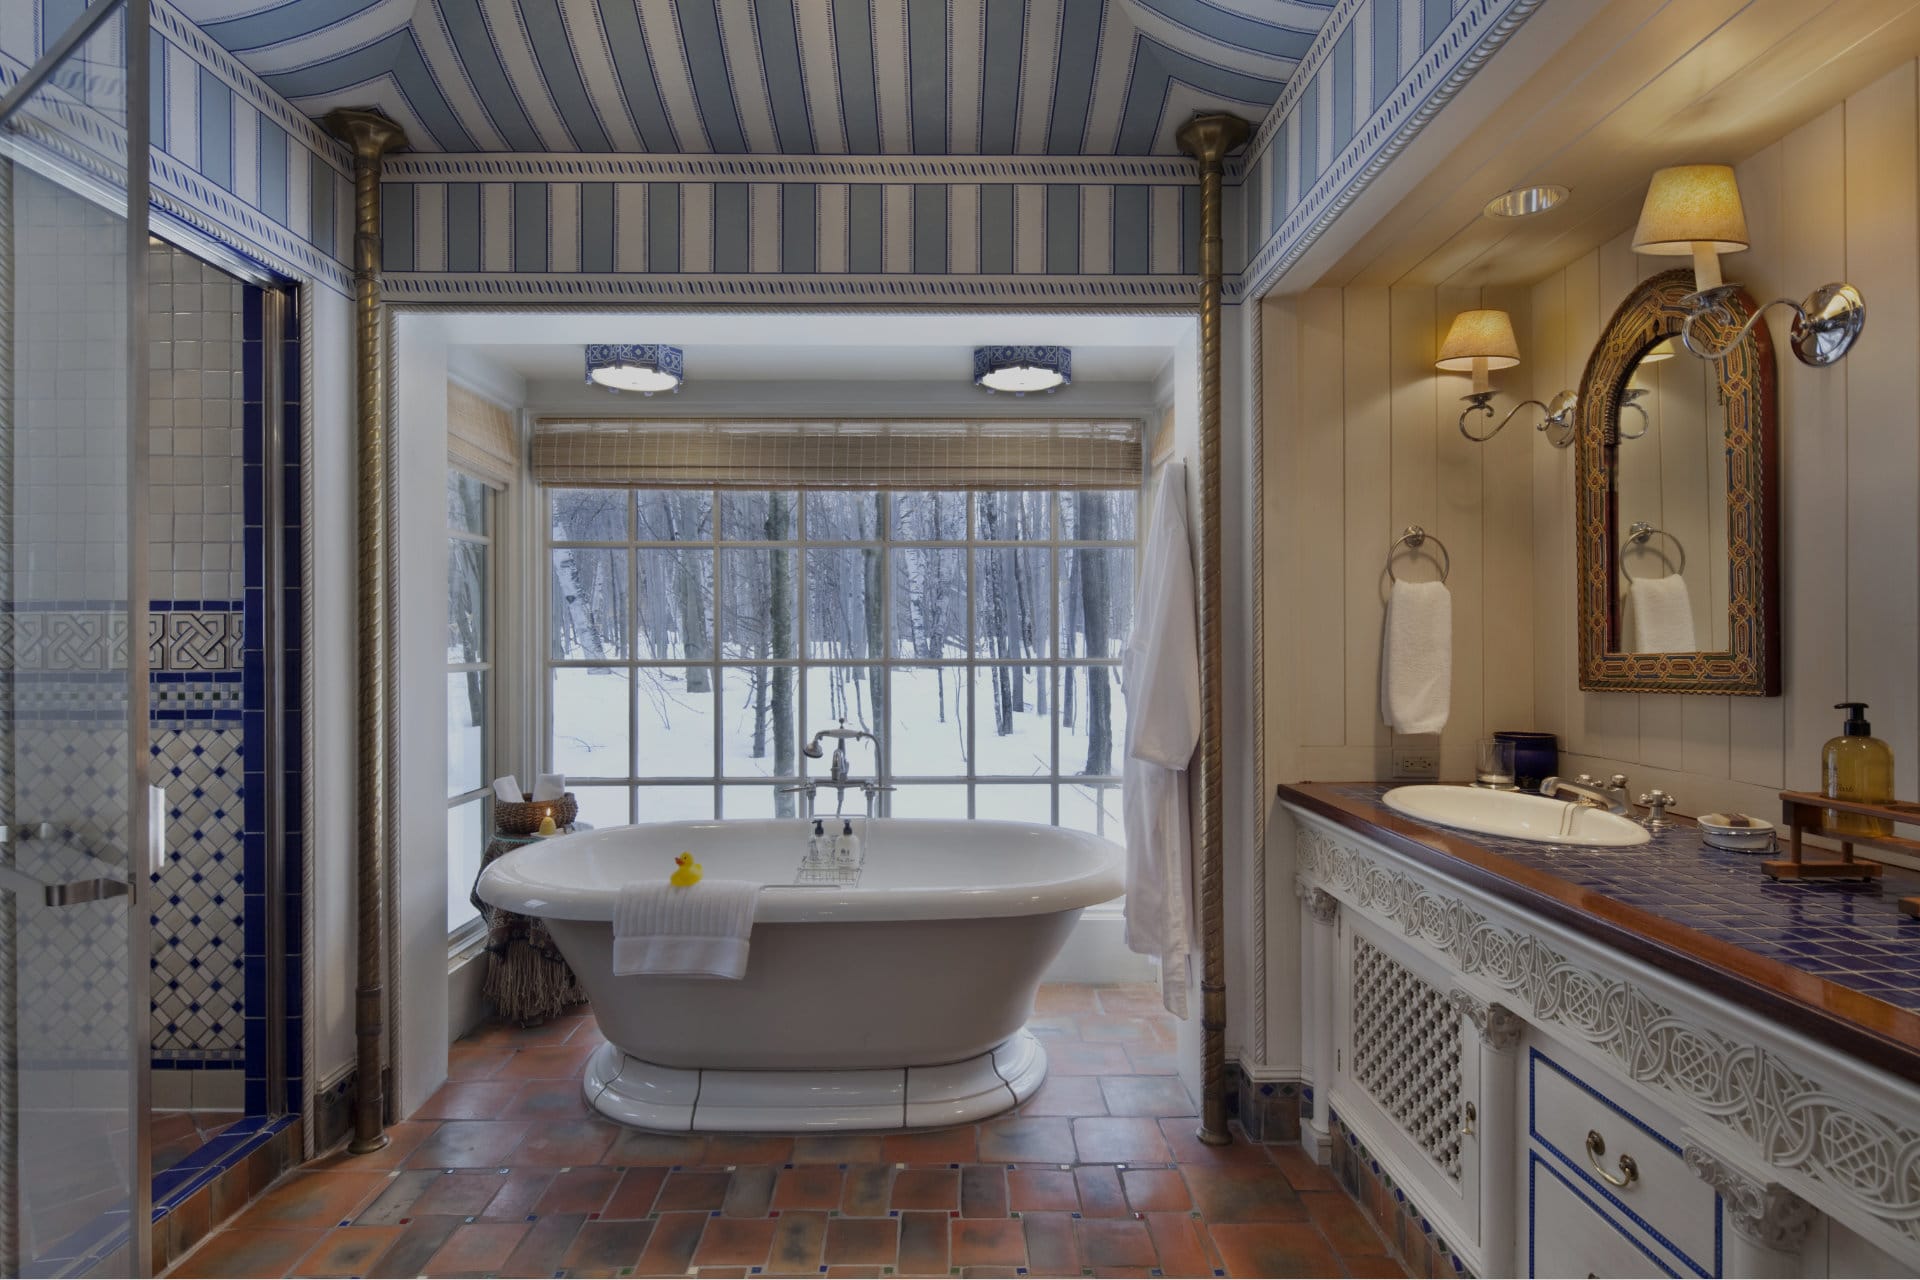 a white bath tub placed in front of a window looking out at snowy woods